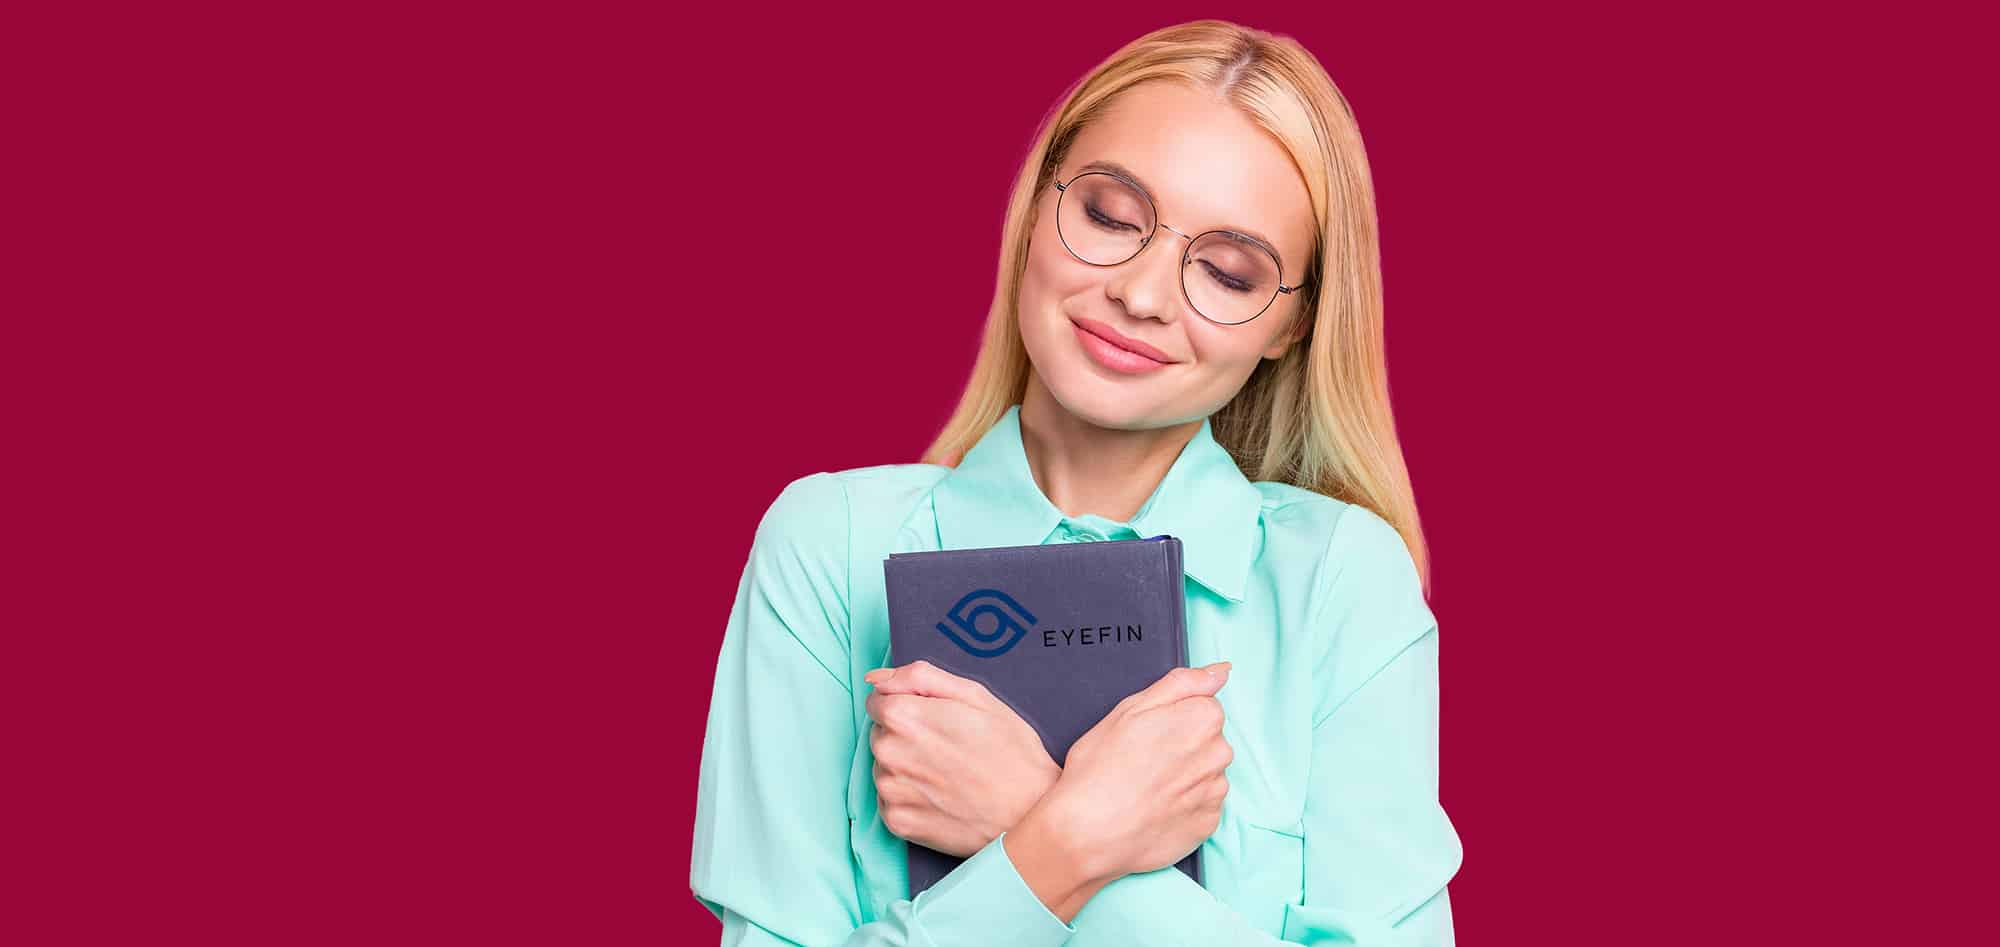 Attractive Blonde lady, smiling while wearing her glasses and holding an Eyefin Contract